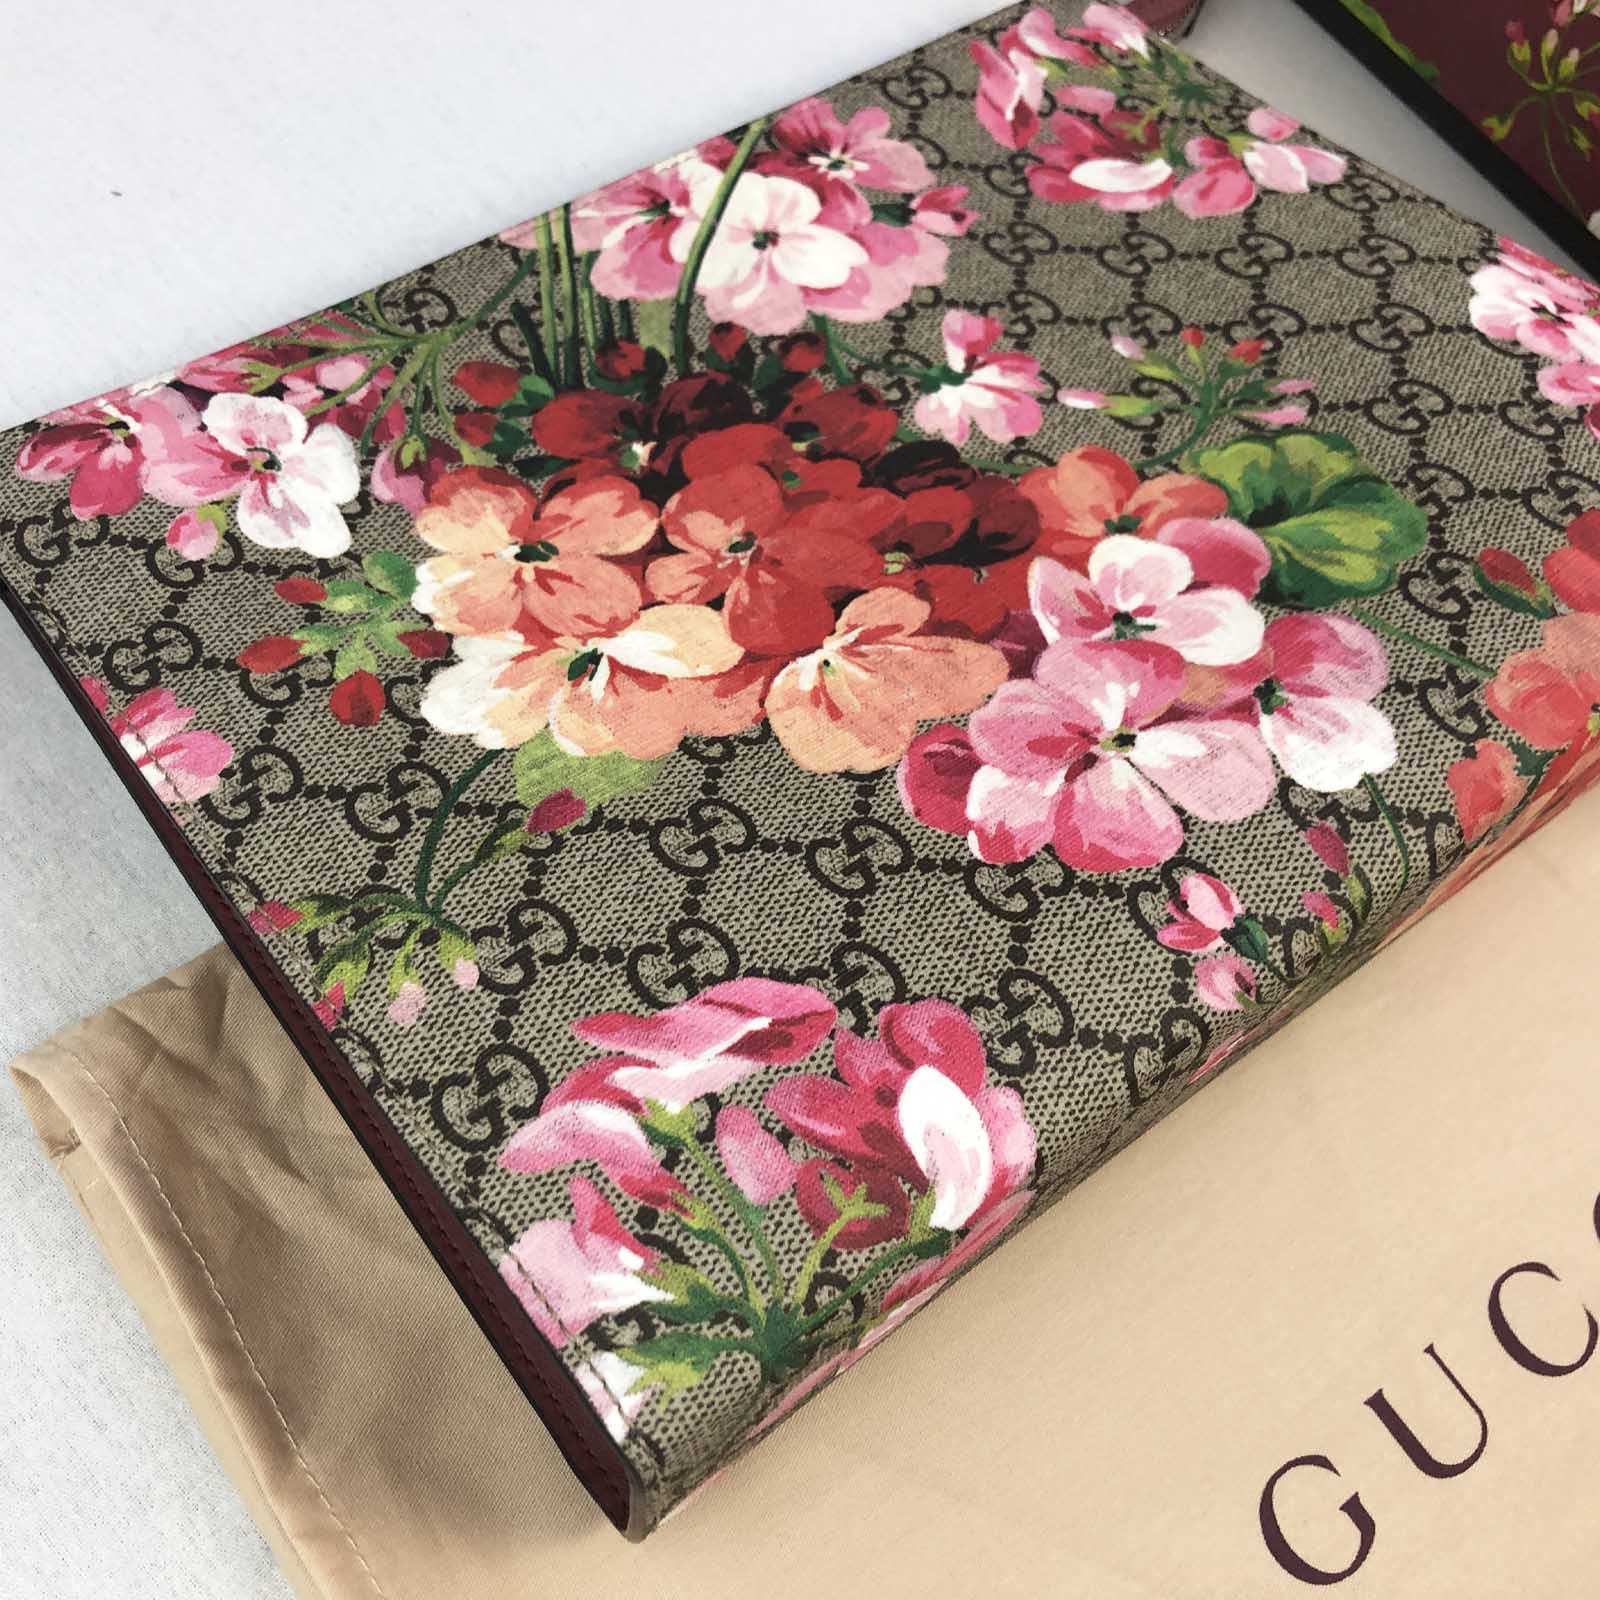 Korean Smitsom sygdom Ambient Gucci Purse With Pink Flowers | SEMA Data Co-op